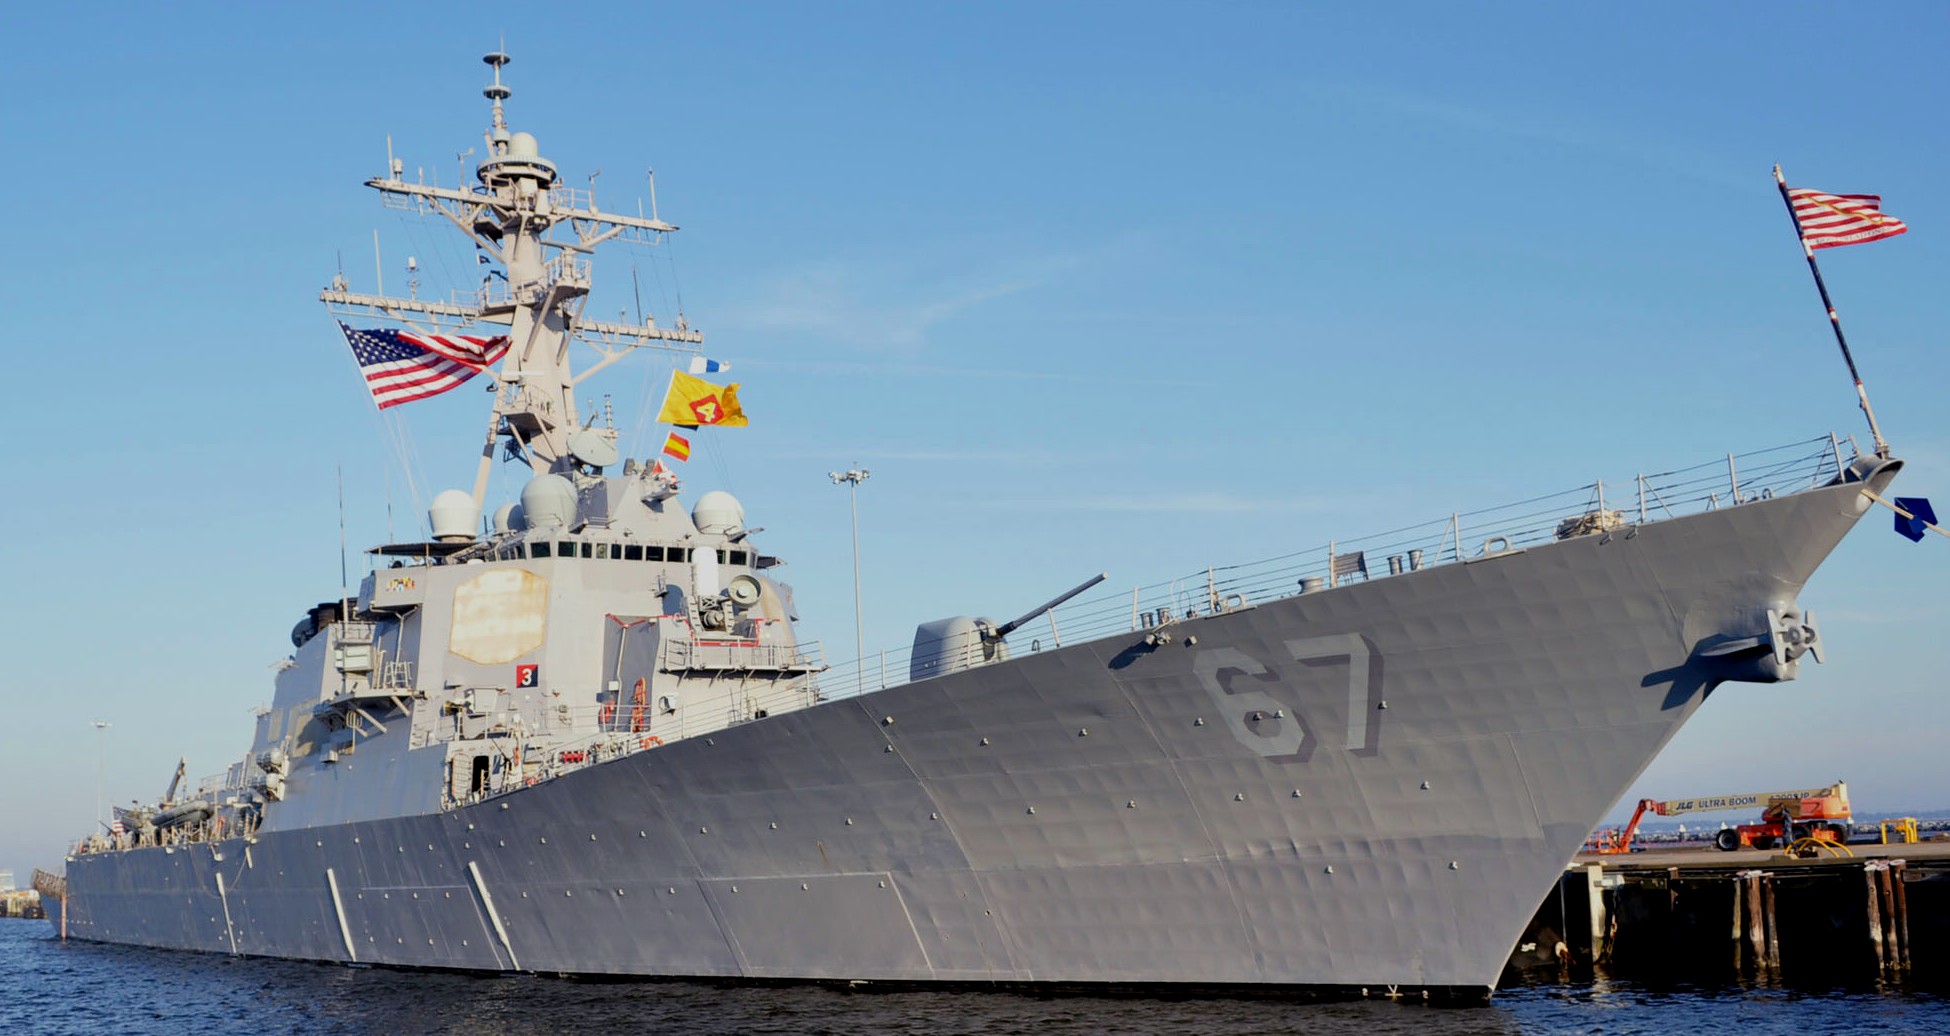 ddg-67 uss cole guided missile destroyer arleigh burke class navy aegis 26